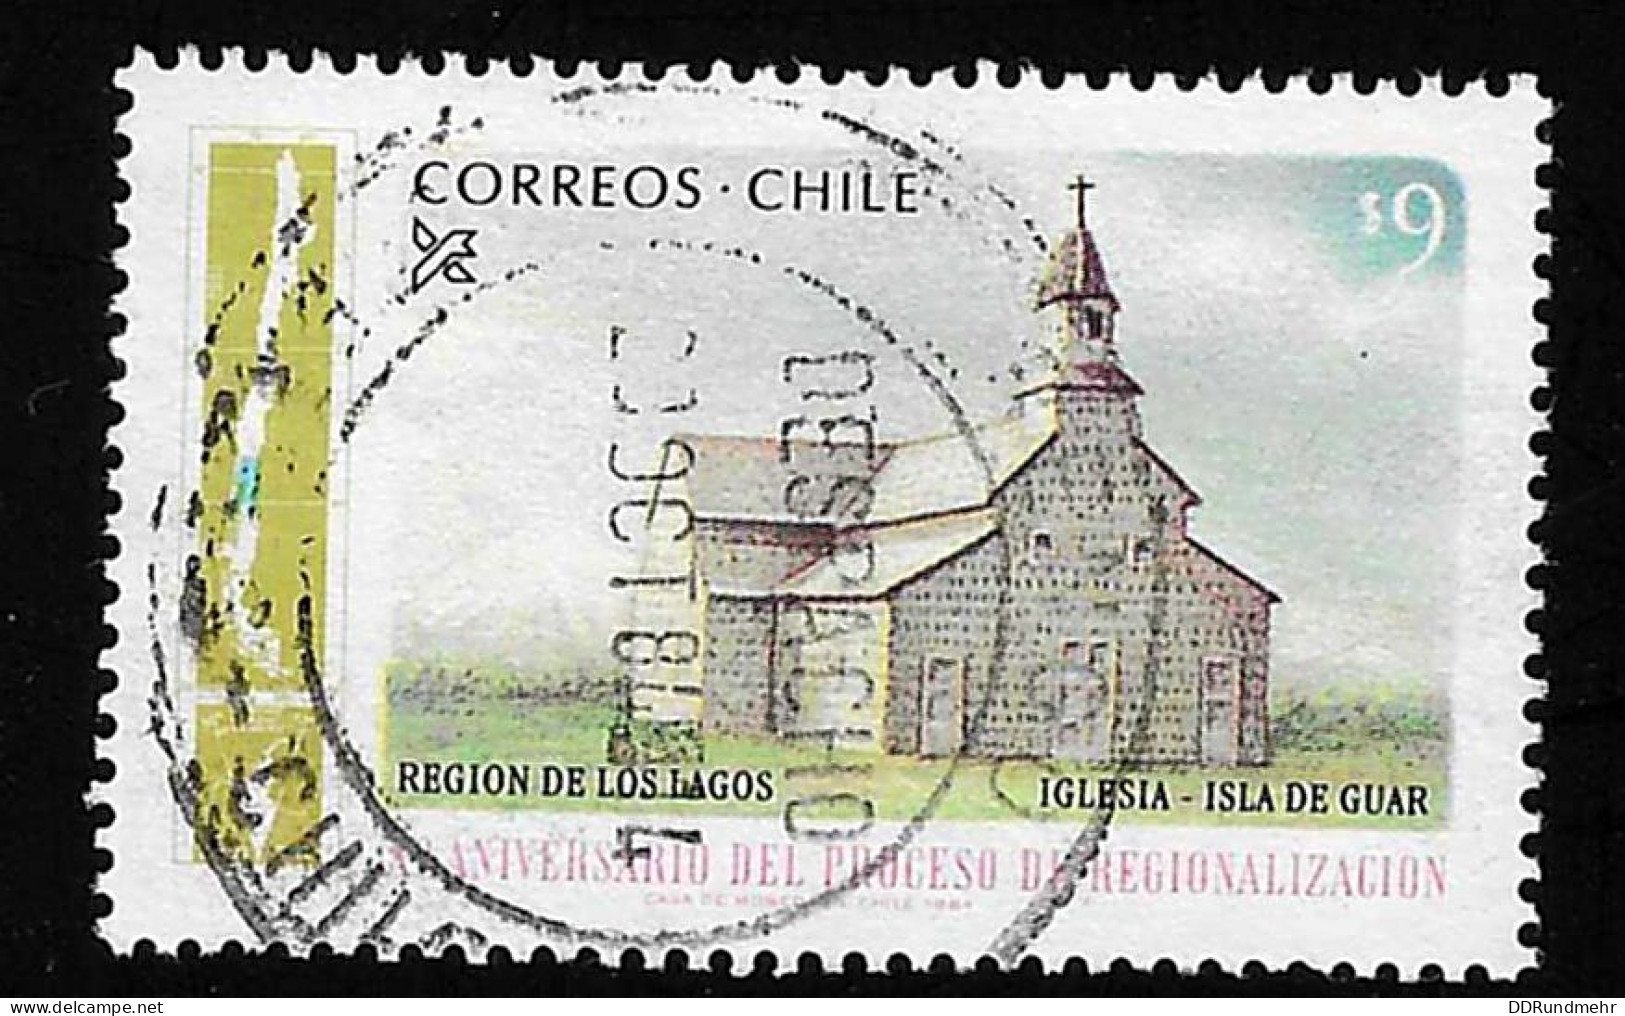 1984 Los Lagos  Michel CL 1056 Stamp Number CL 674l Yvert Et Tellier CL 668 Stanley Gibbons CL 984 Used - Chile